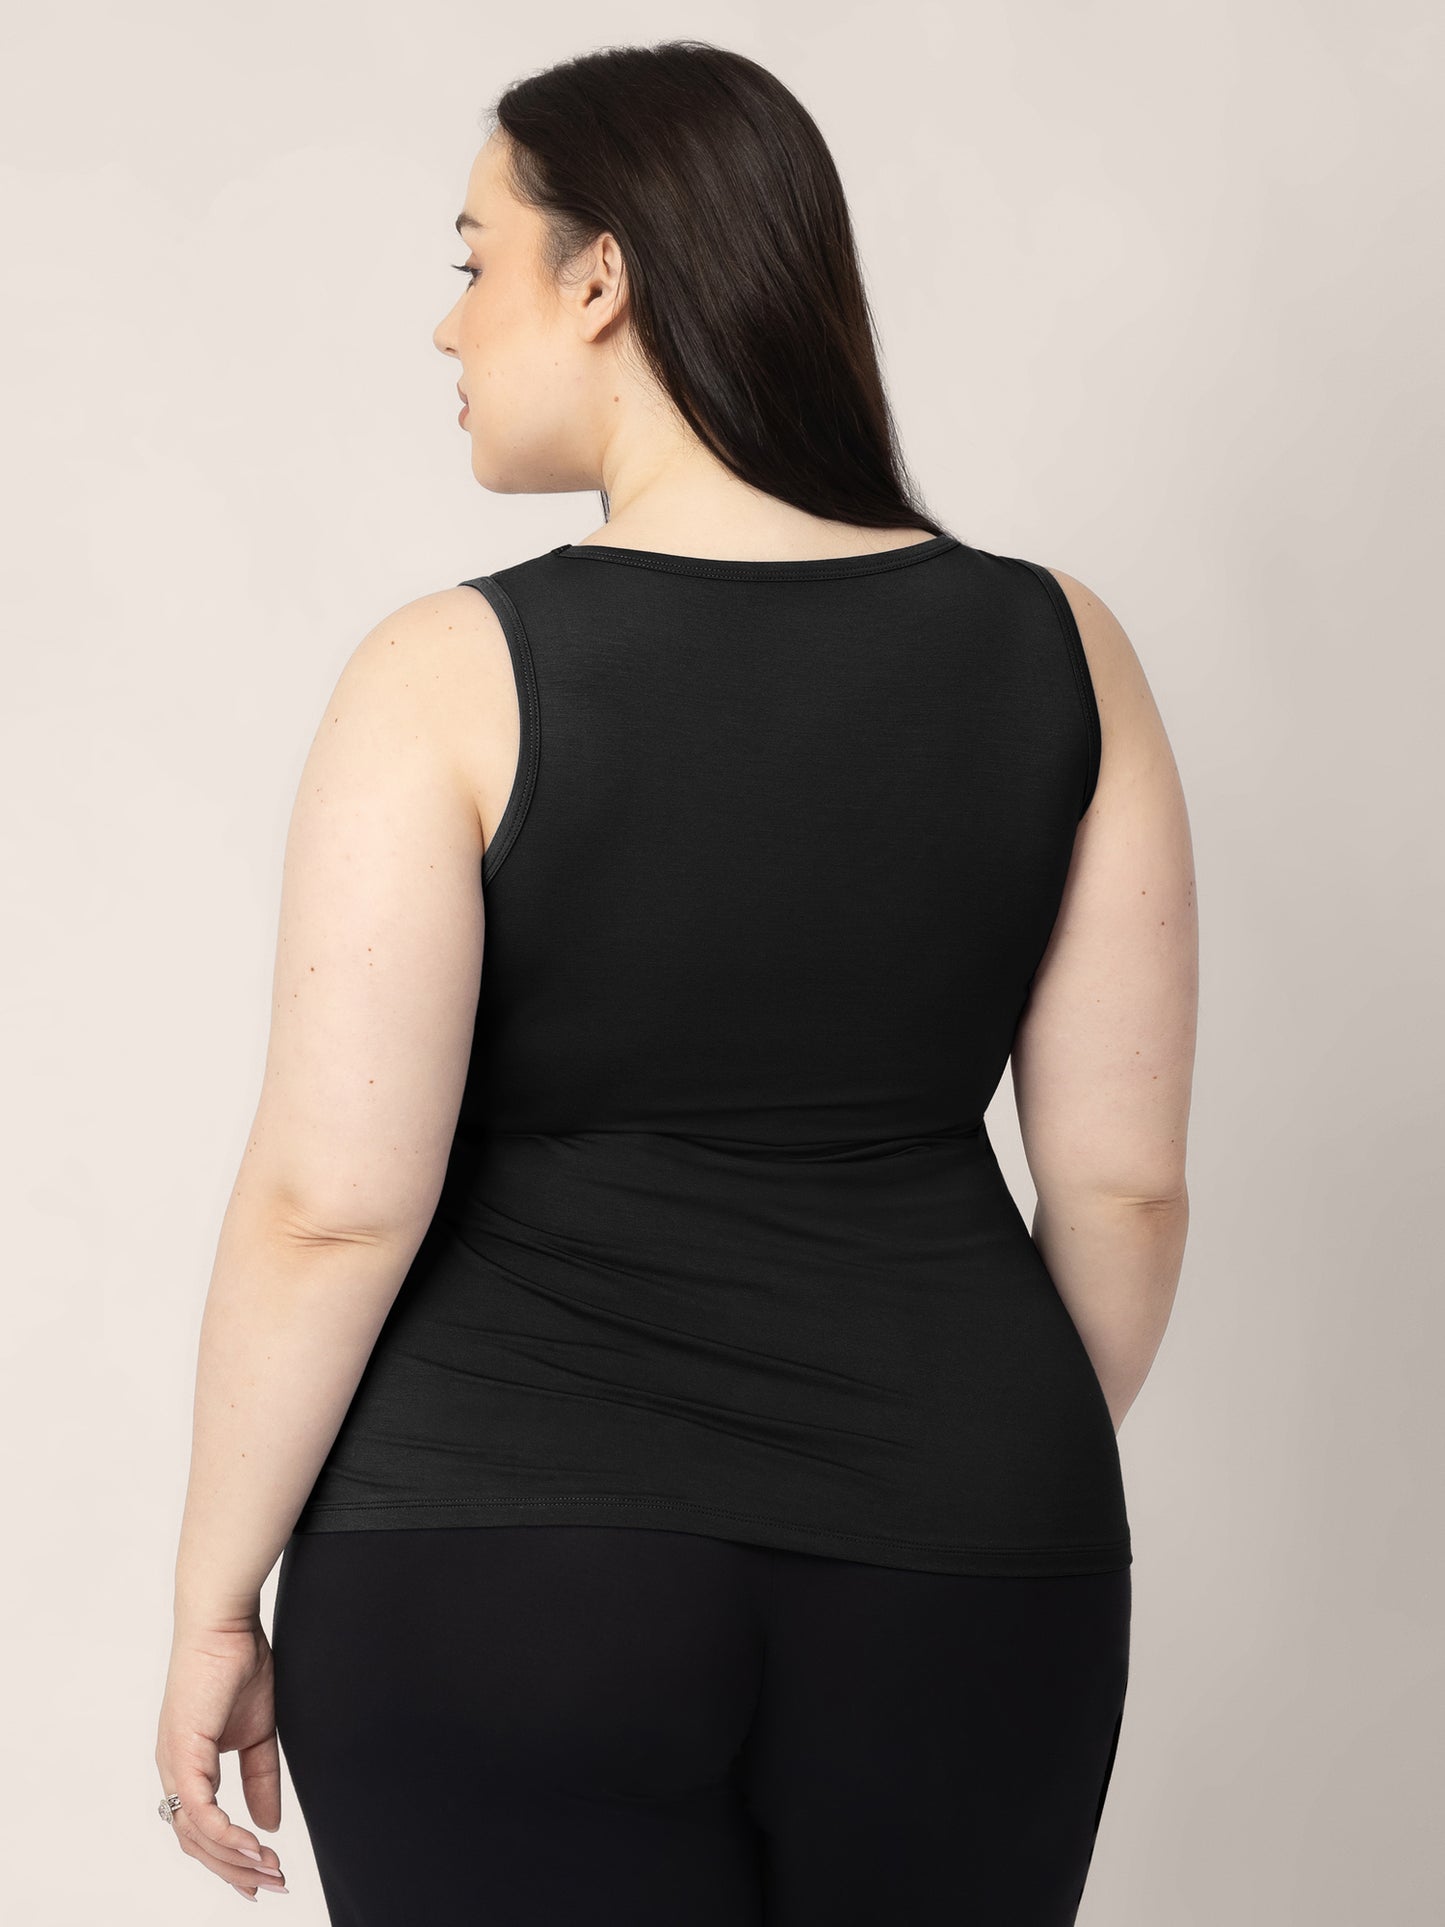 The back view of a model wearing the Everyday Essential Nursing Tank in Black